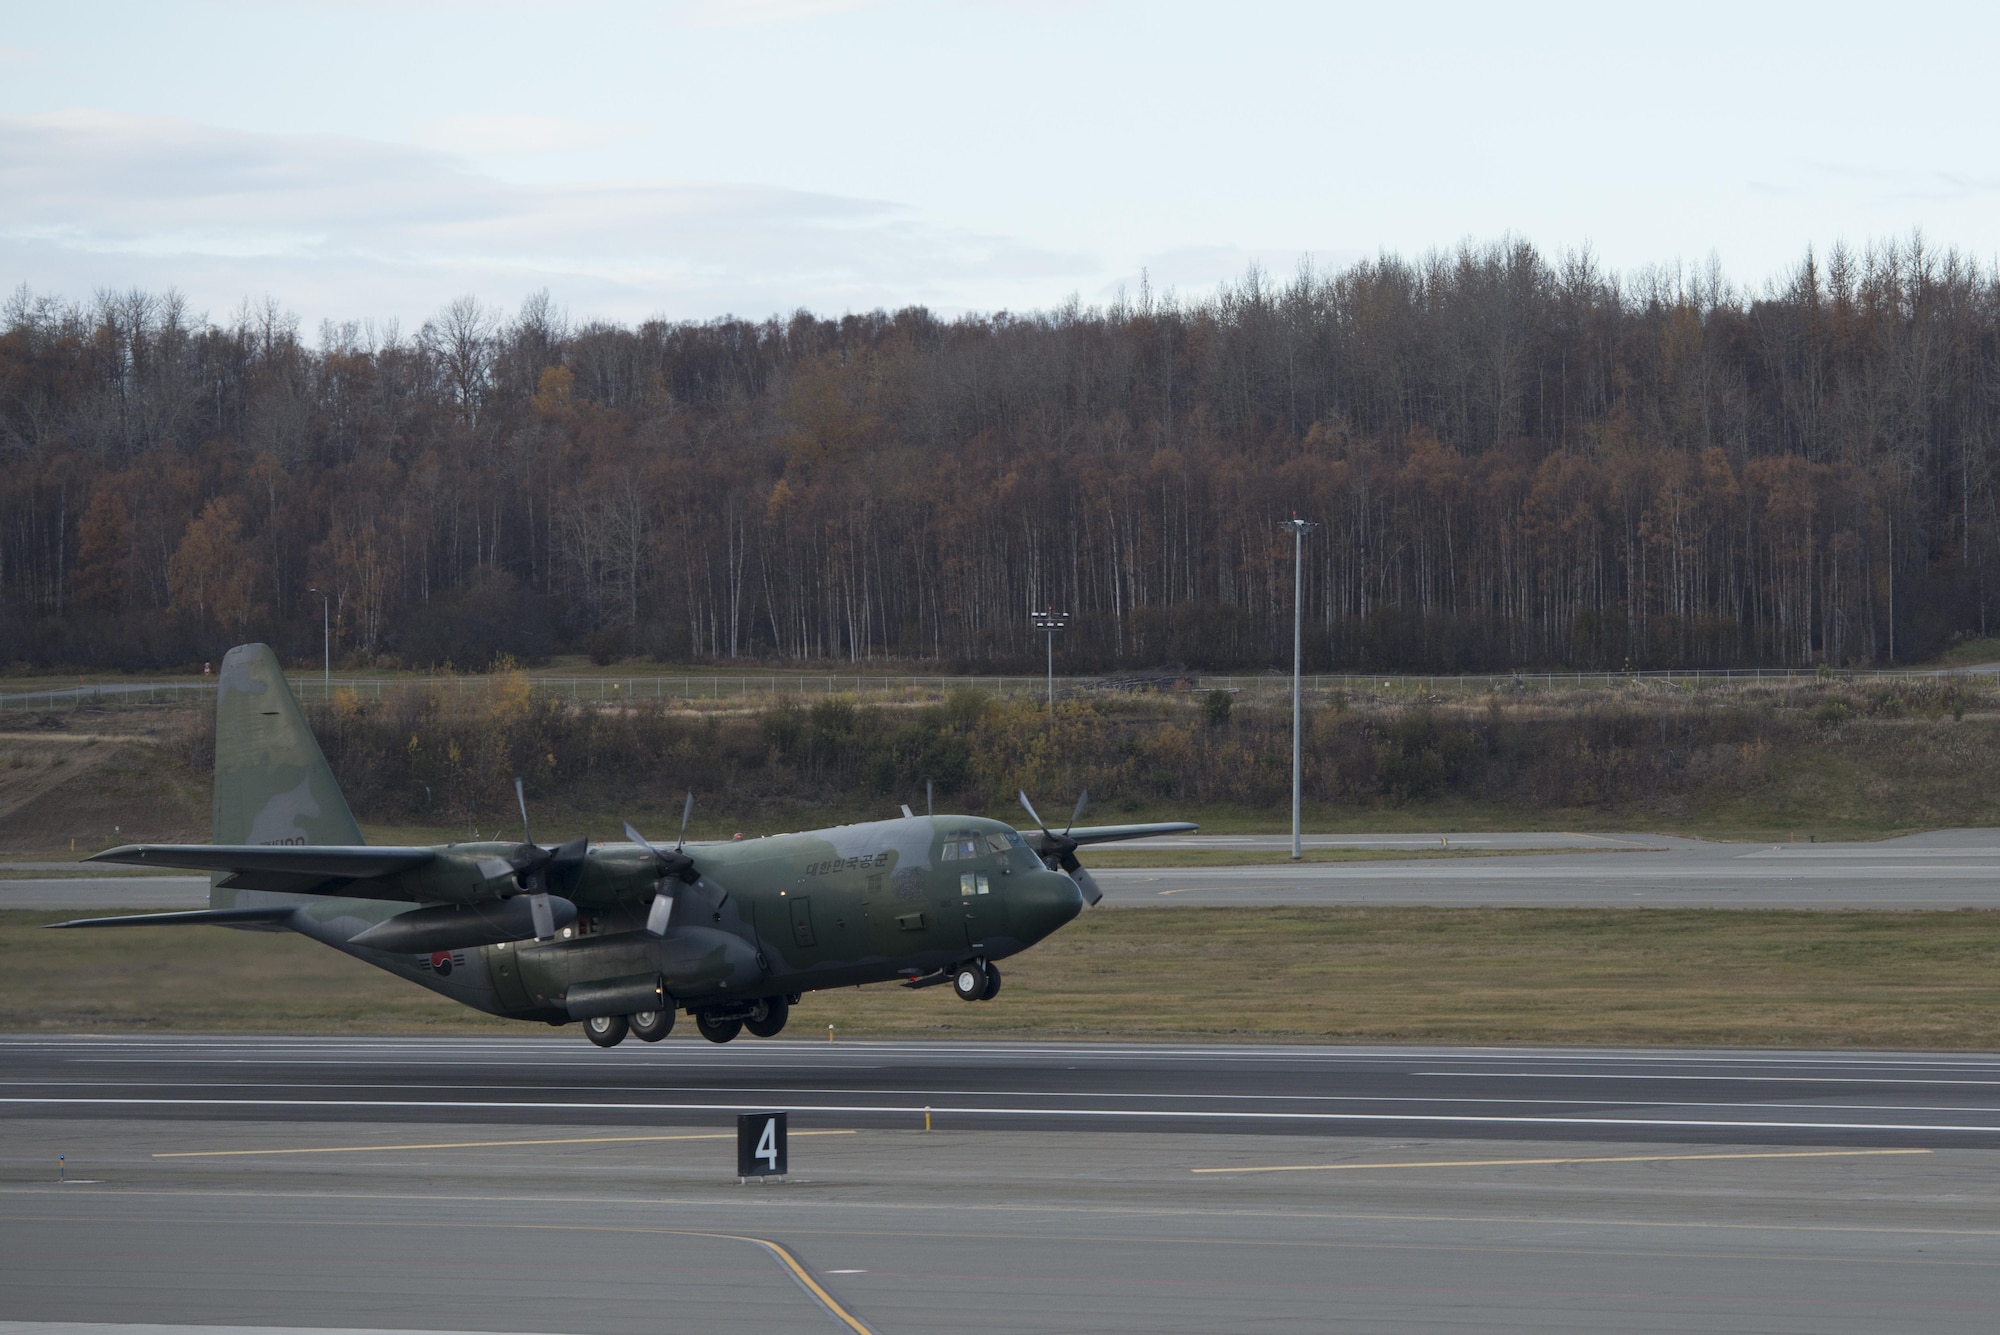 A Republic of Korea Air Force C-130 Hercules departs Joint Base Elmendorf-Richardson during Red Flag - Alaska 17-1 Oct. 12, 2016. RF-A is a joint exercise focused on improving combat readiness of the U.S. military and international forces, which included the ROKAF and Royal New Zealand Air Force this iteration. (U.S. Air Force photo by Airman 1st Class Christopher R. Morales)